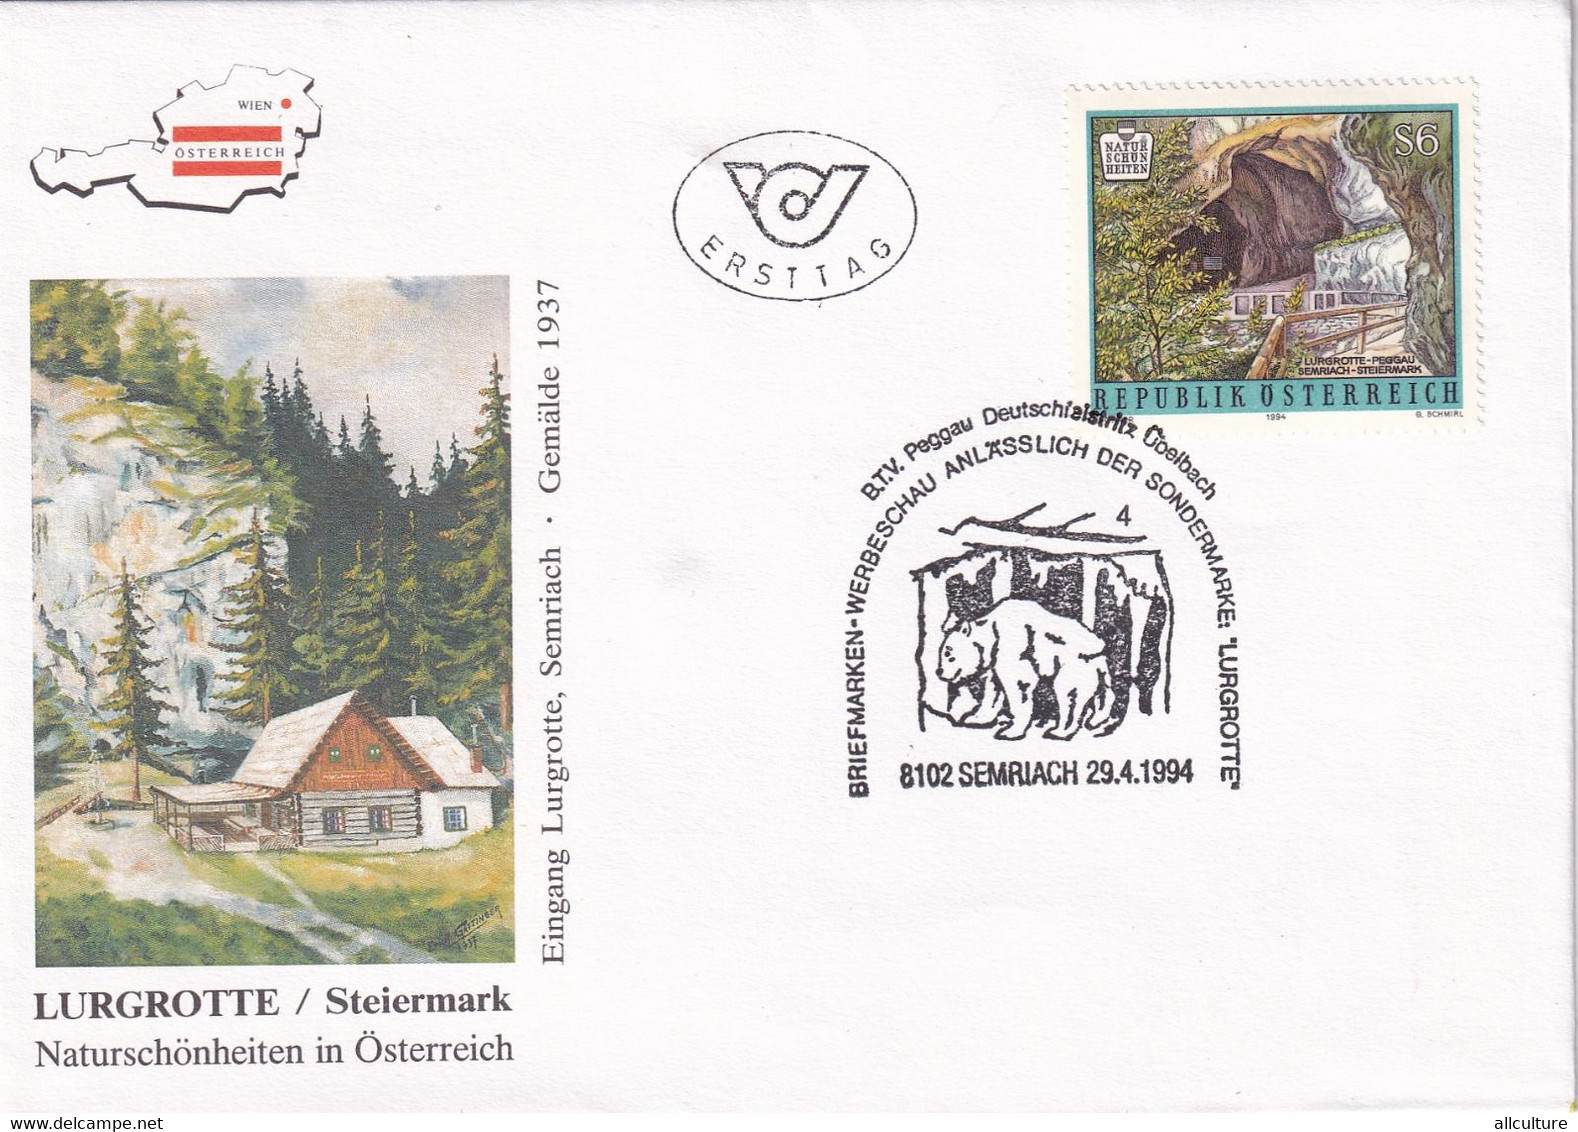 A9392 - THE LURGROTTE STEIERMARK, OESTERREICH WIEN ERSTTAG, 1994 REPUBLIK OESTERREICH USED STAMP ON COVER - Covers & Documents